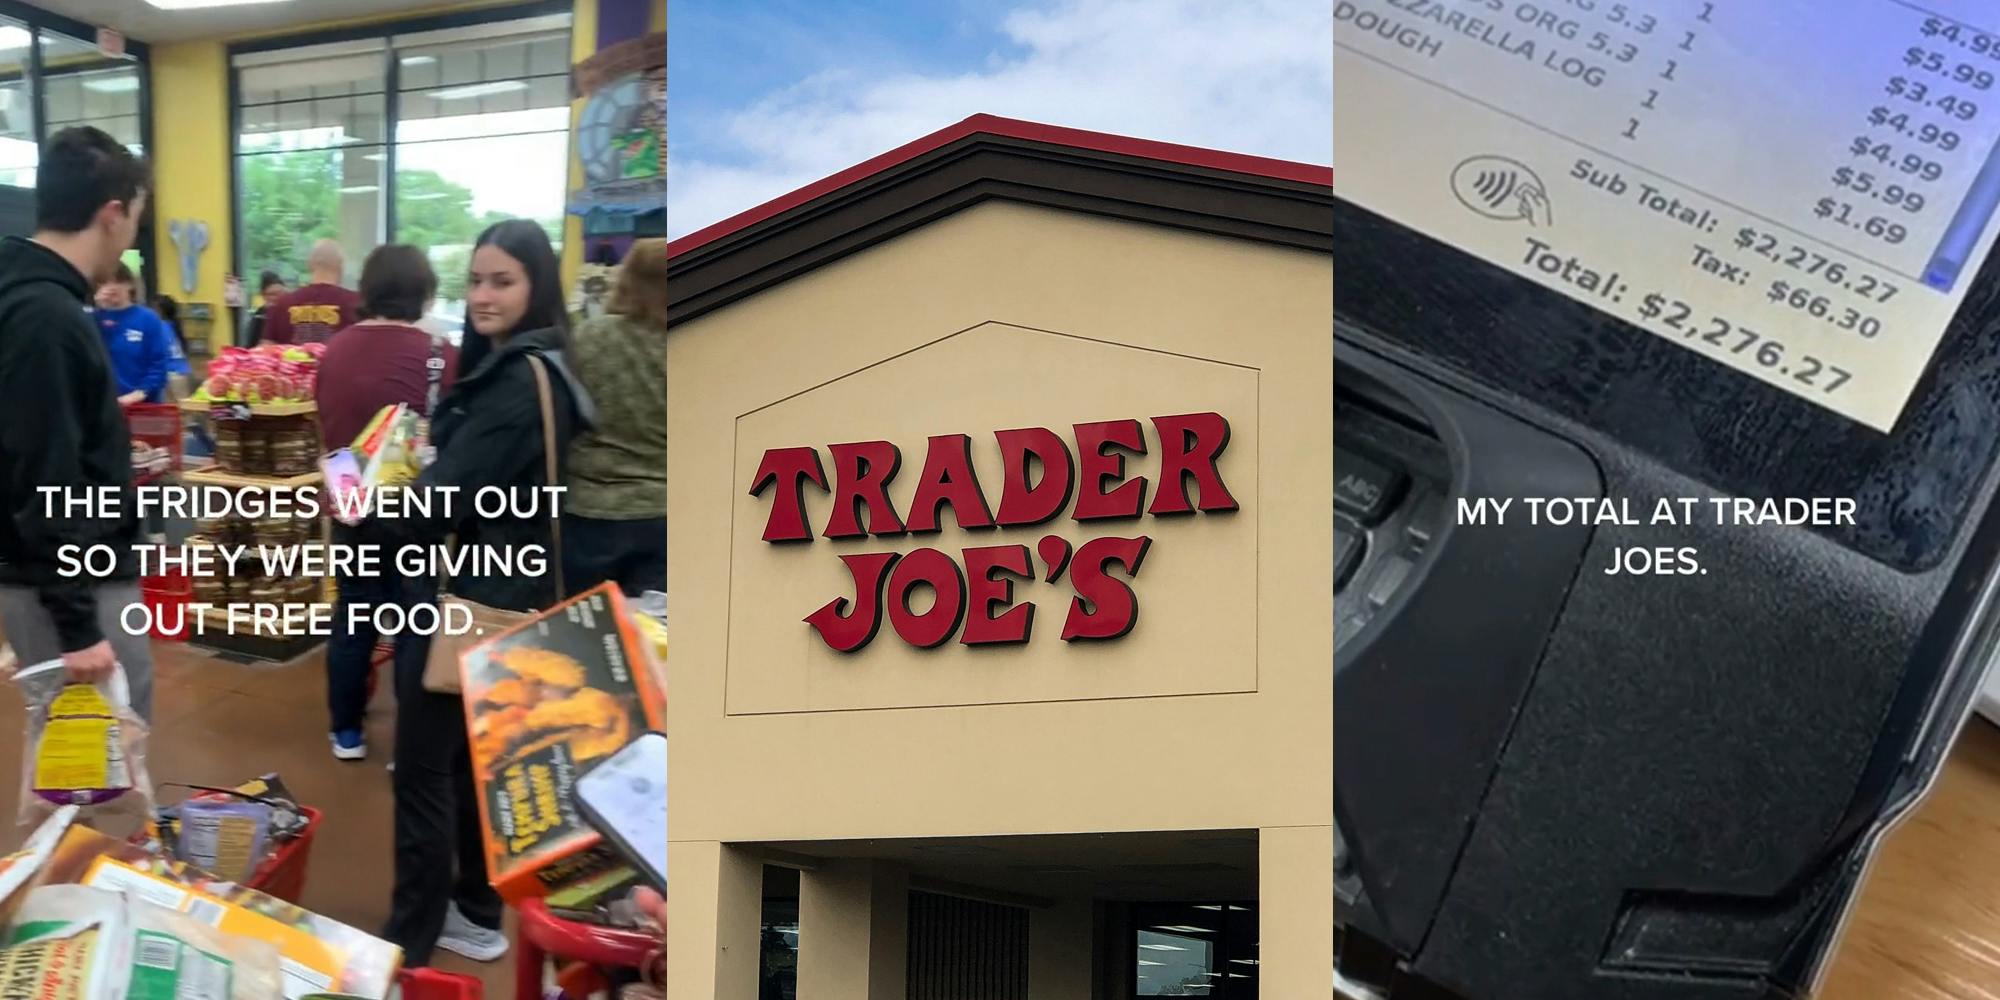 Trader Joe's customers with full carts in line with caption "THE FRIDGES WENT OUT SO THEY WERE GIVING OUT FREE FOOD." (l) Trader Joe's building with sign and blue sky (c) Trader Joe's check out with total on screen at $2,276.27 with caption "MY TOTAL AT TRADER JOES" (r)